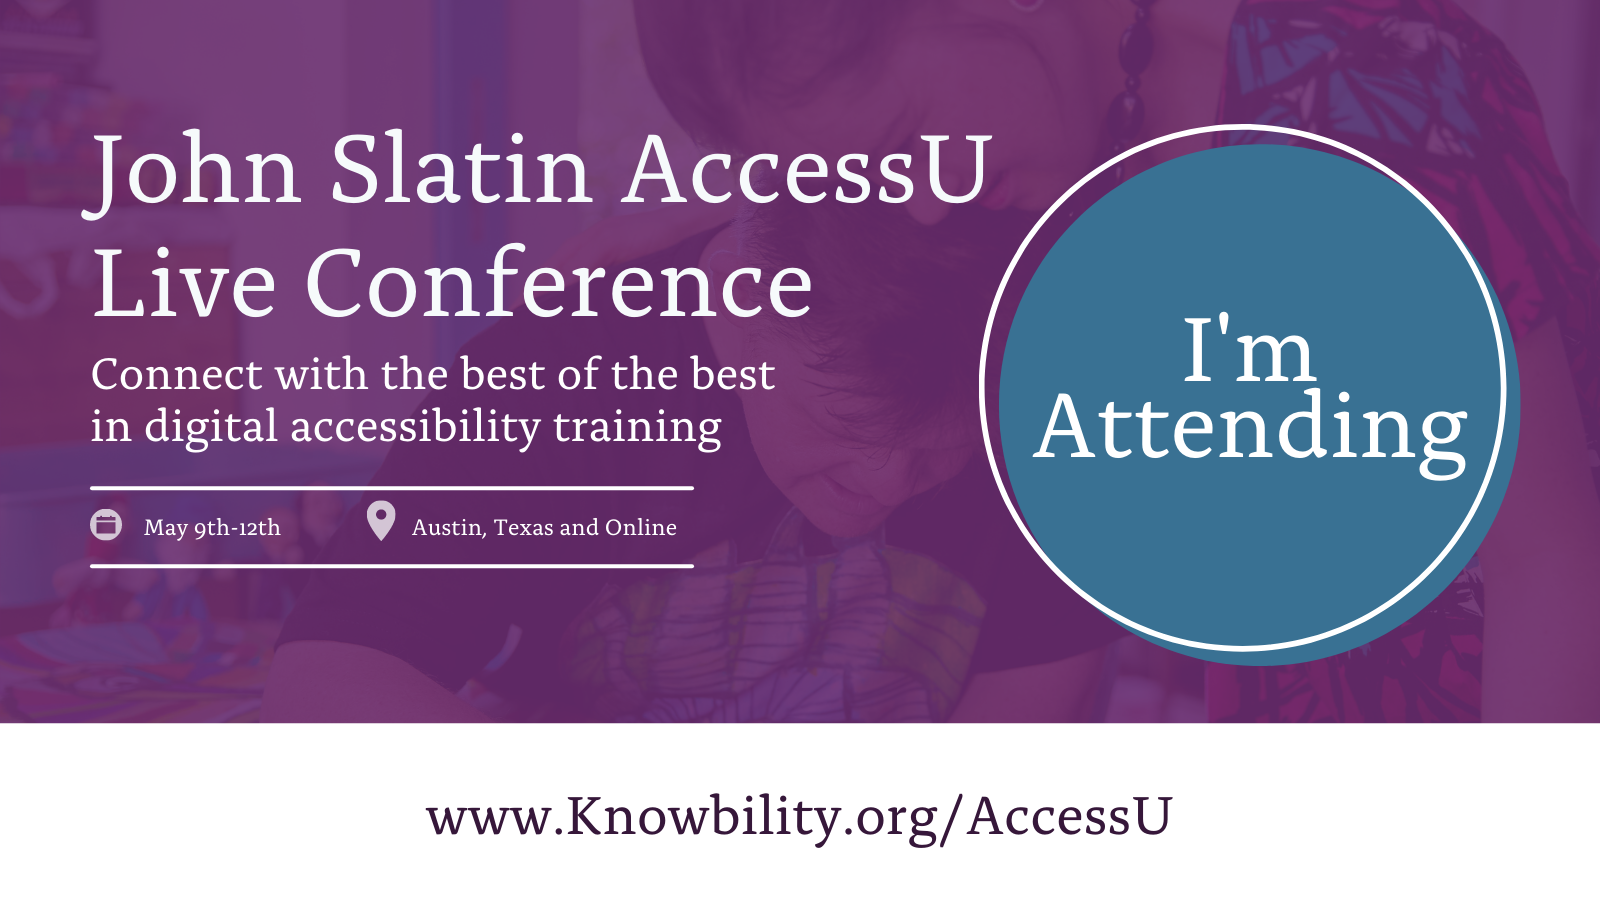 John Slatin AccessU Live Conference. Connect with the best of the best in digital accessibility training. May 9th-12th. Austin, Texas and Online. I'm Attending. www.Knowbility.org/AccessU.